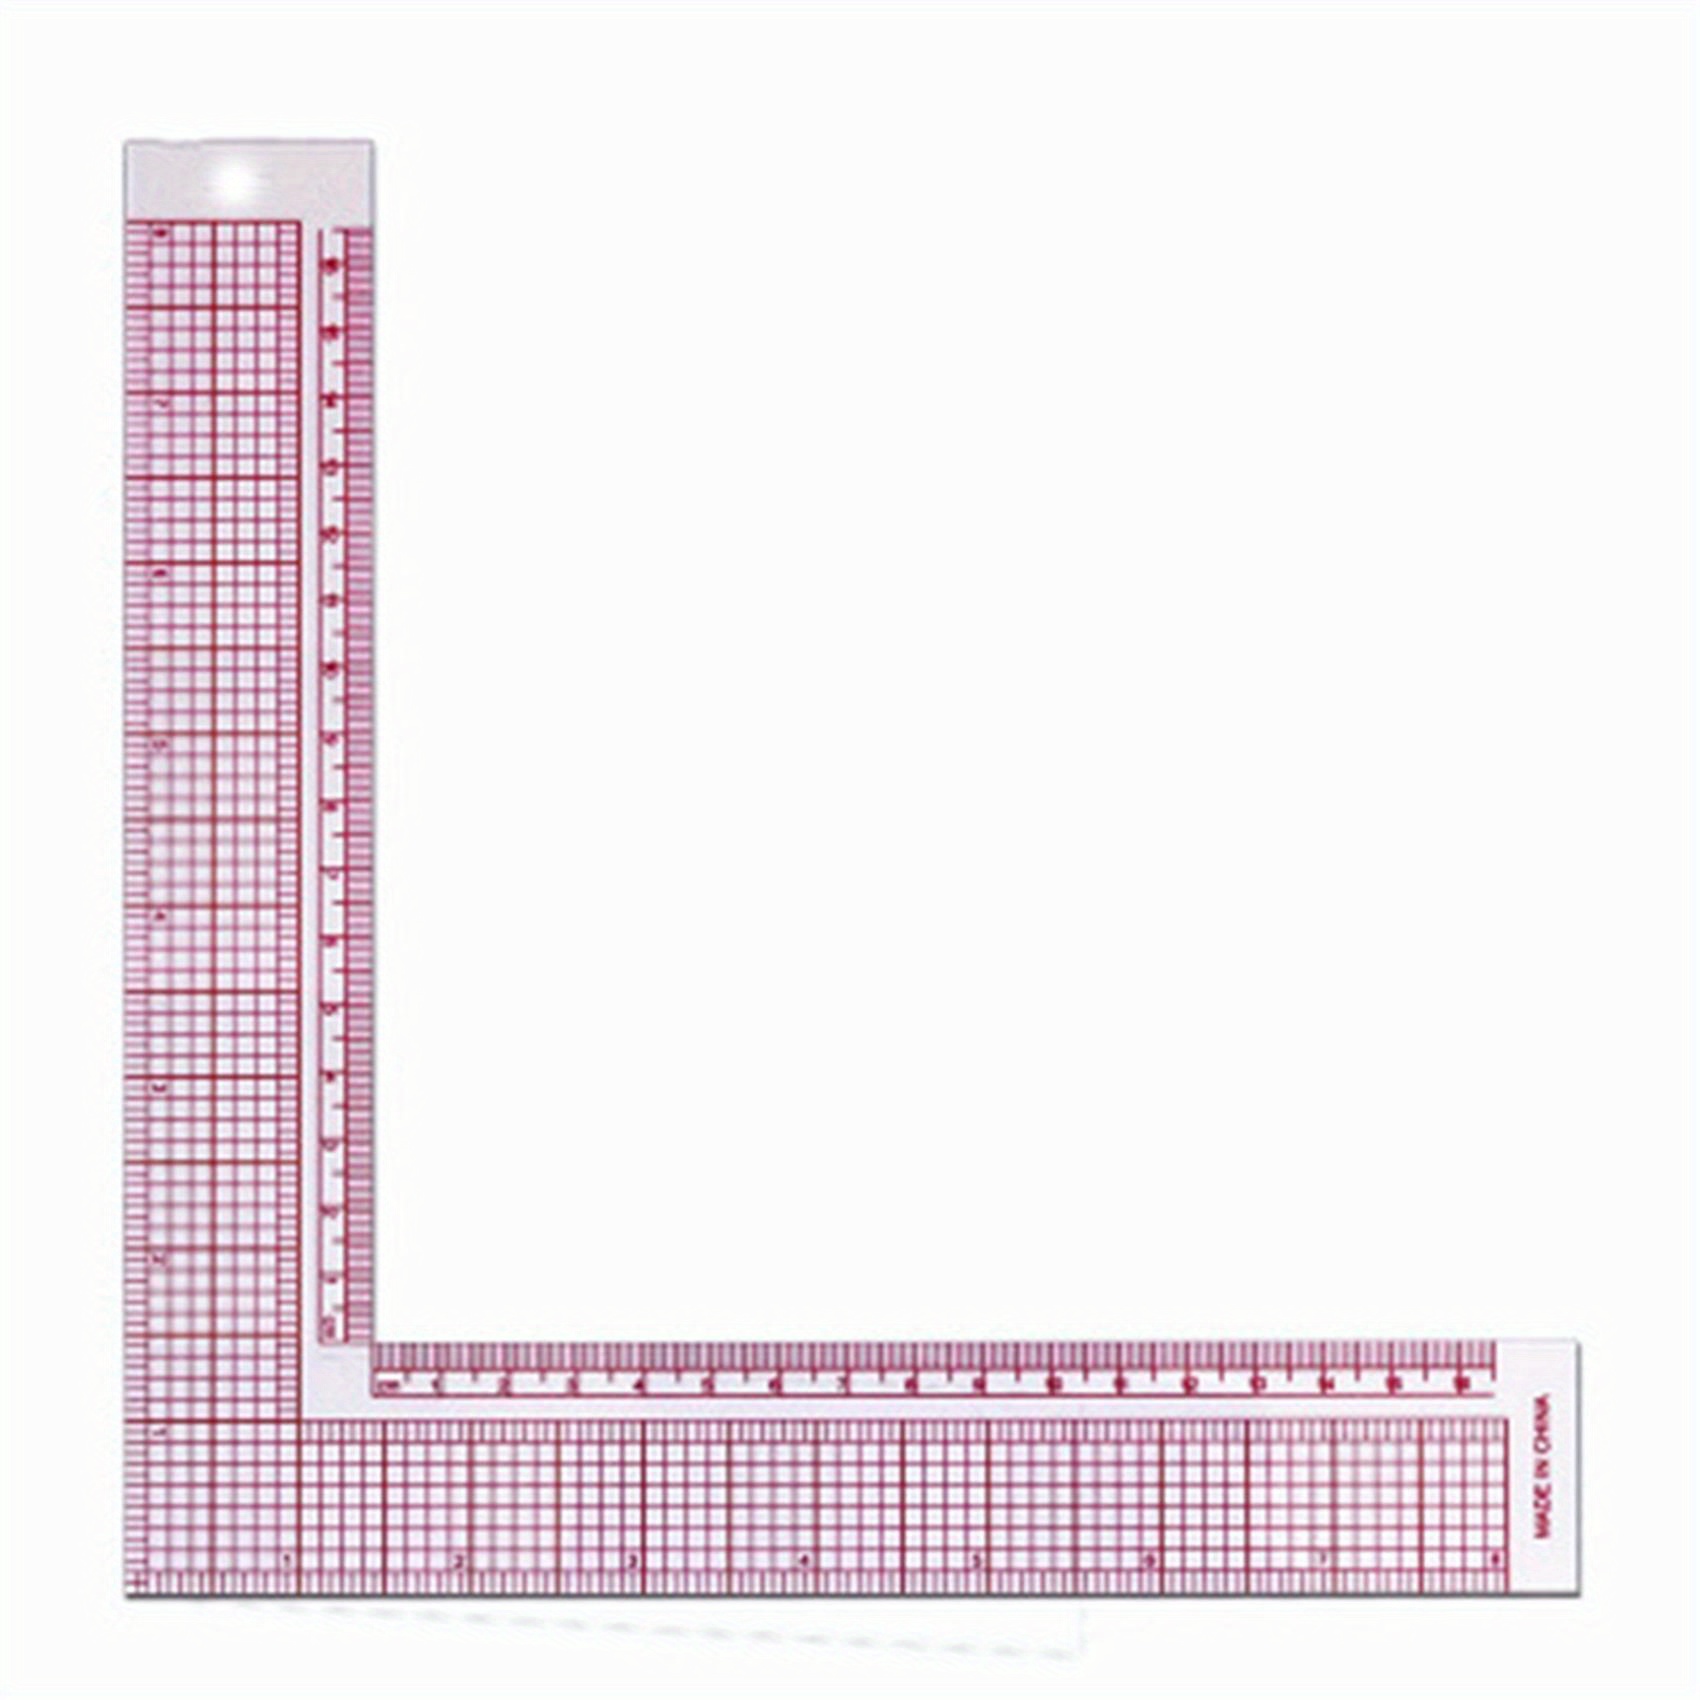 L Shape Sewing Ruler L- Square Shape Ruler Professional Curve Sewing  Measure Tool Accessories for Tailor Craft Lines Details